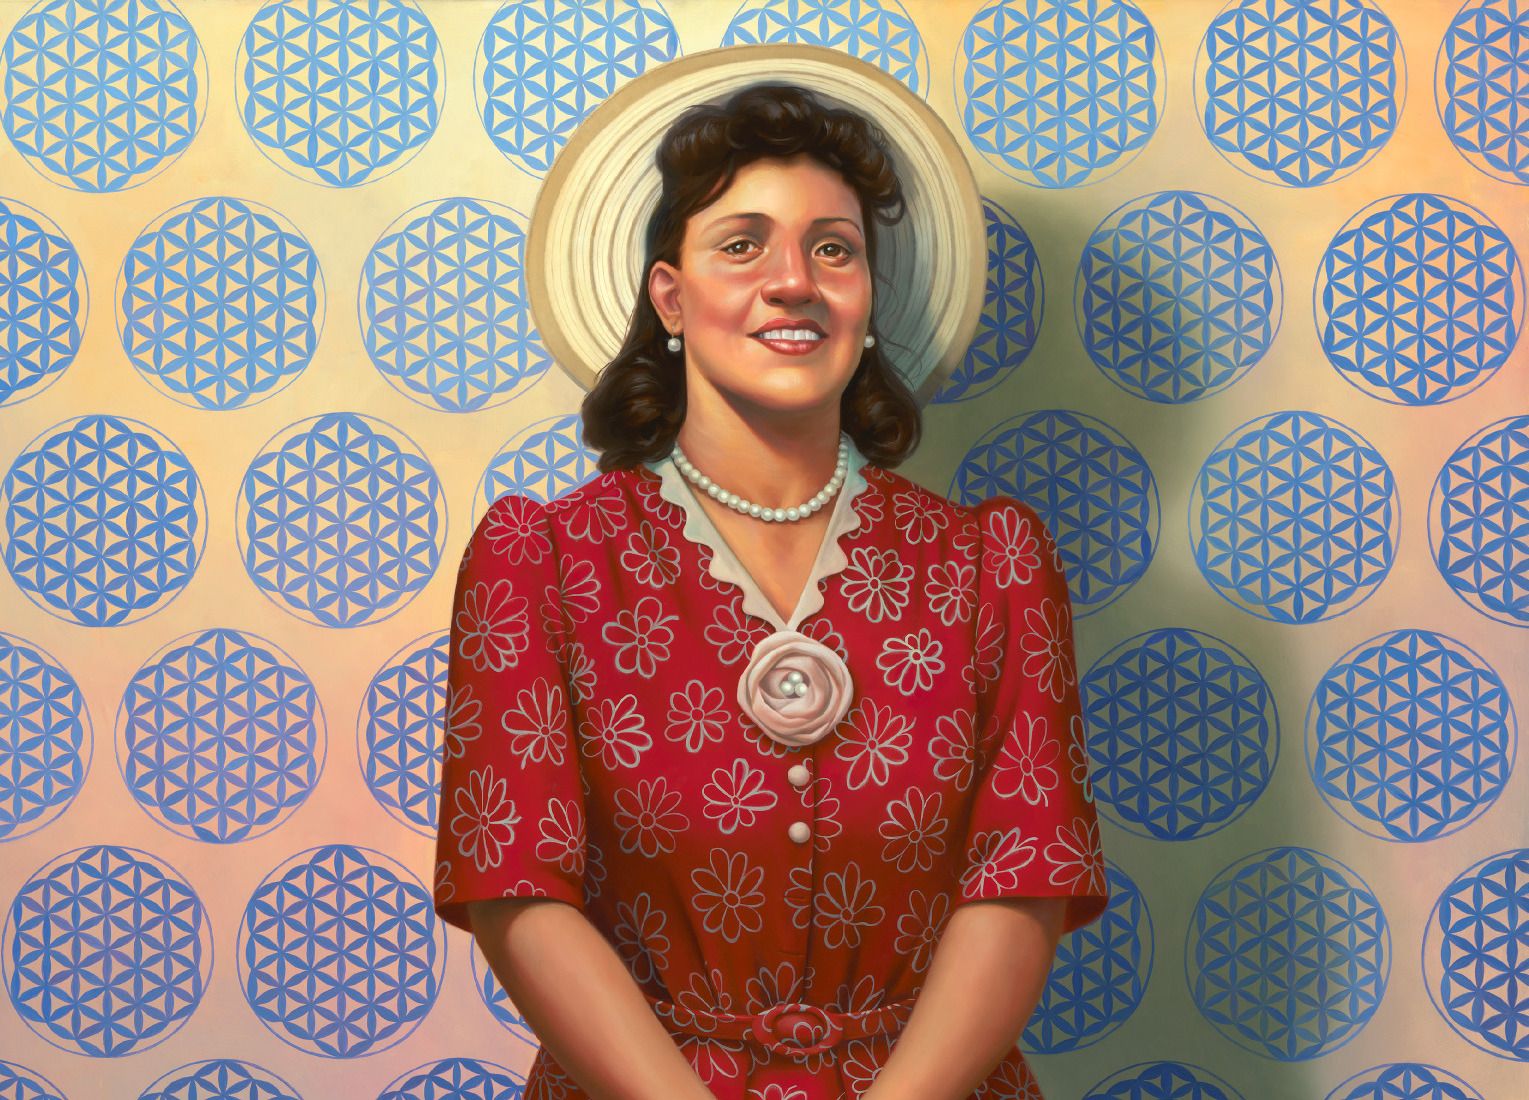 Famed for “Immortal” Cells, Henrietta Lacks is Immortalized in Portraiture